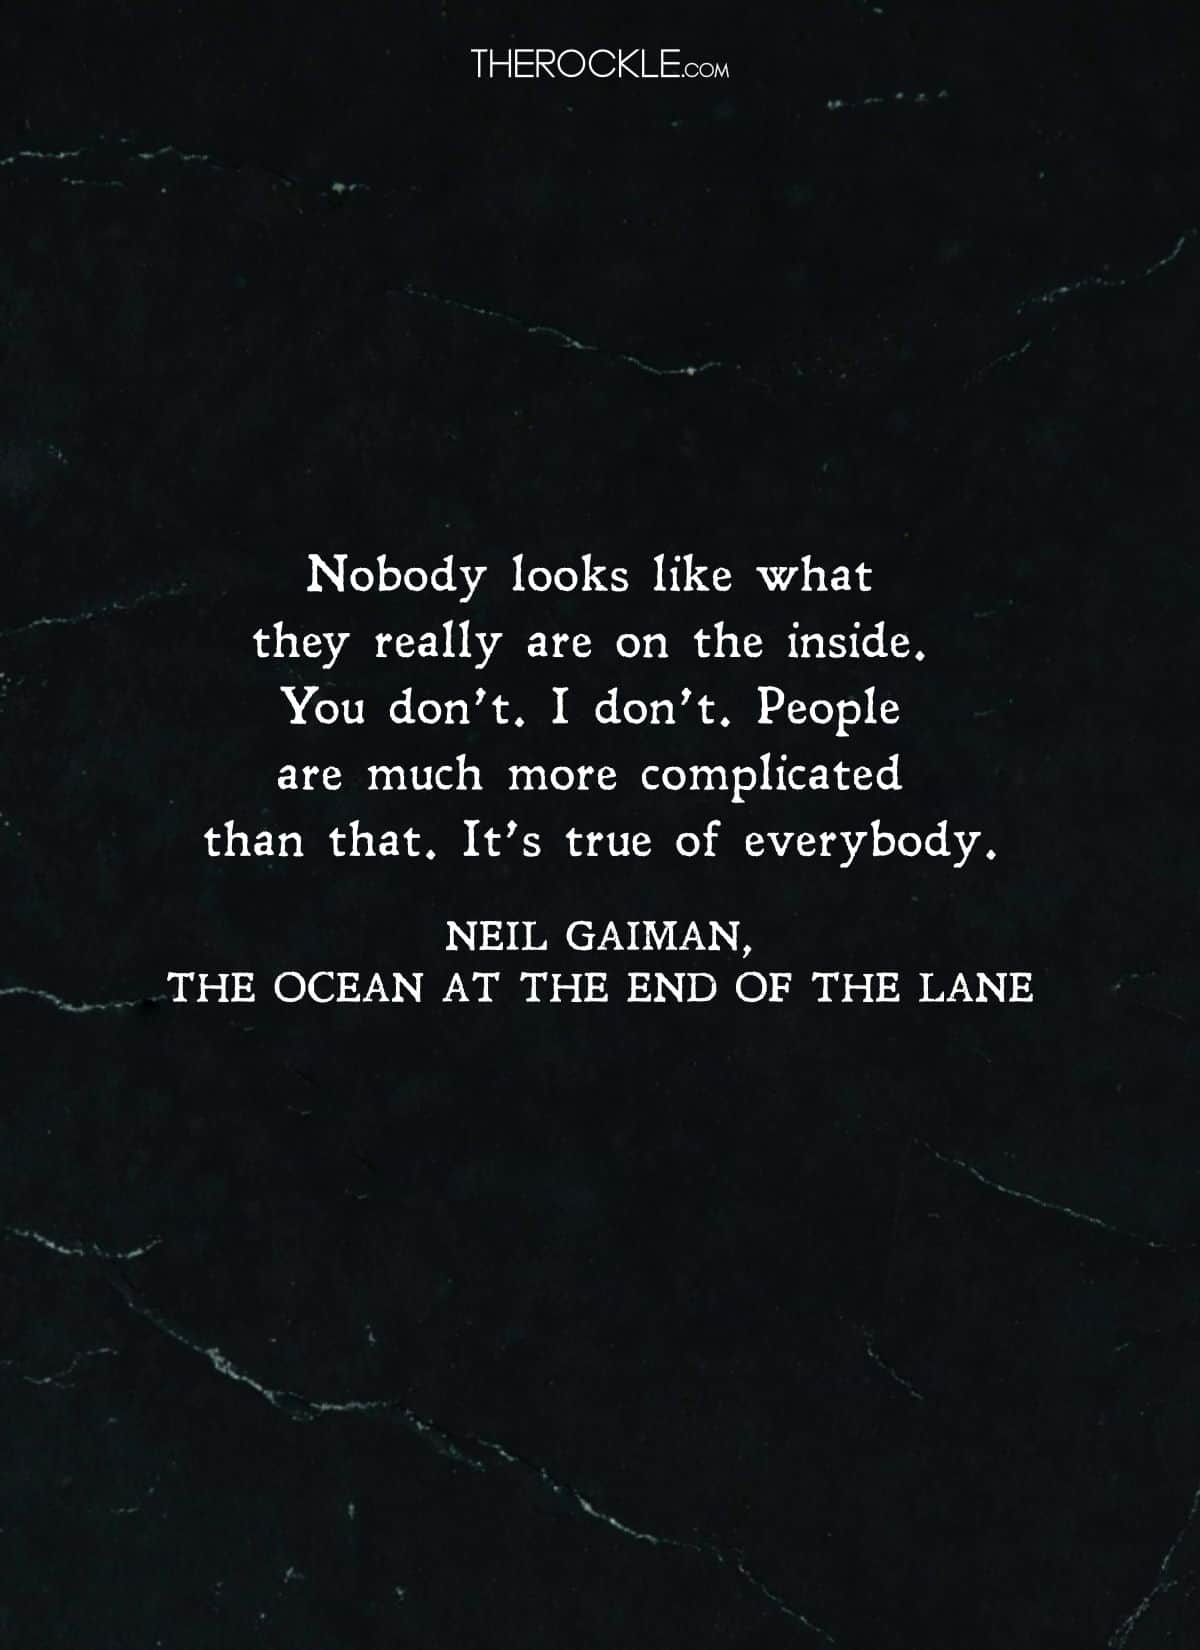 Neil Gaiman quote on human complexity from The Ocean at the End of the Lane